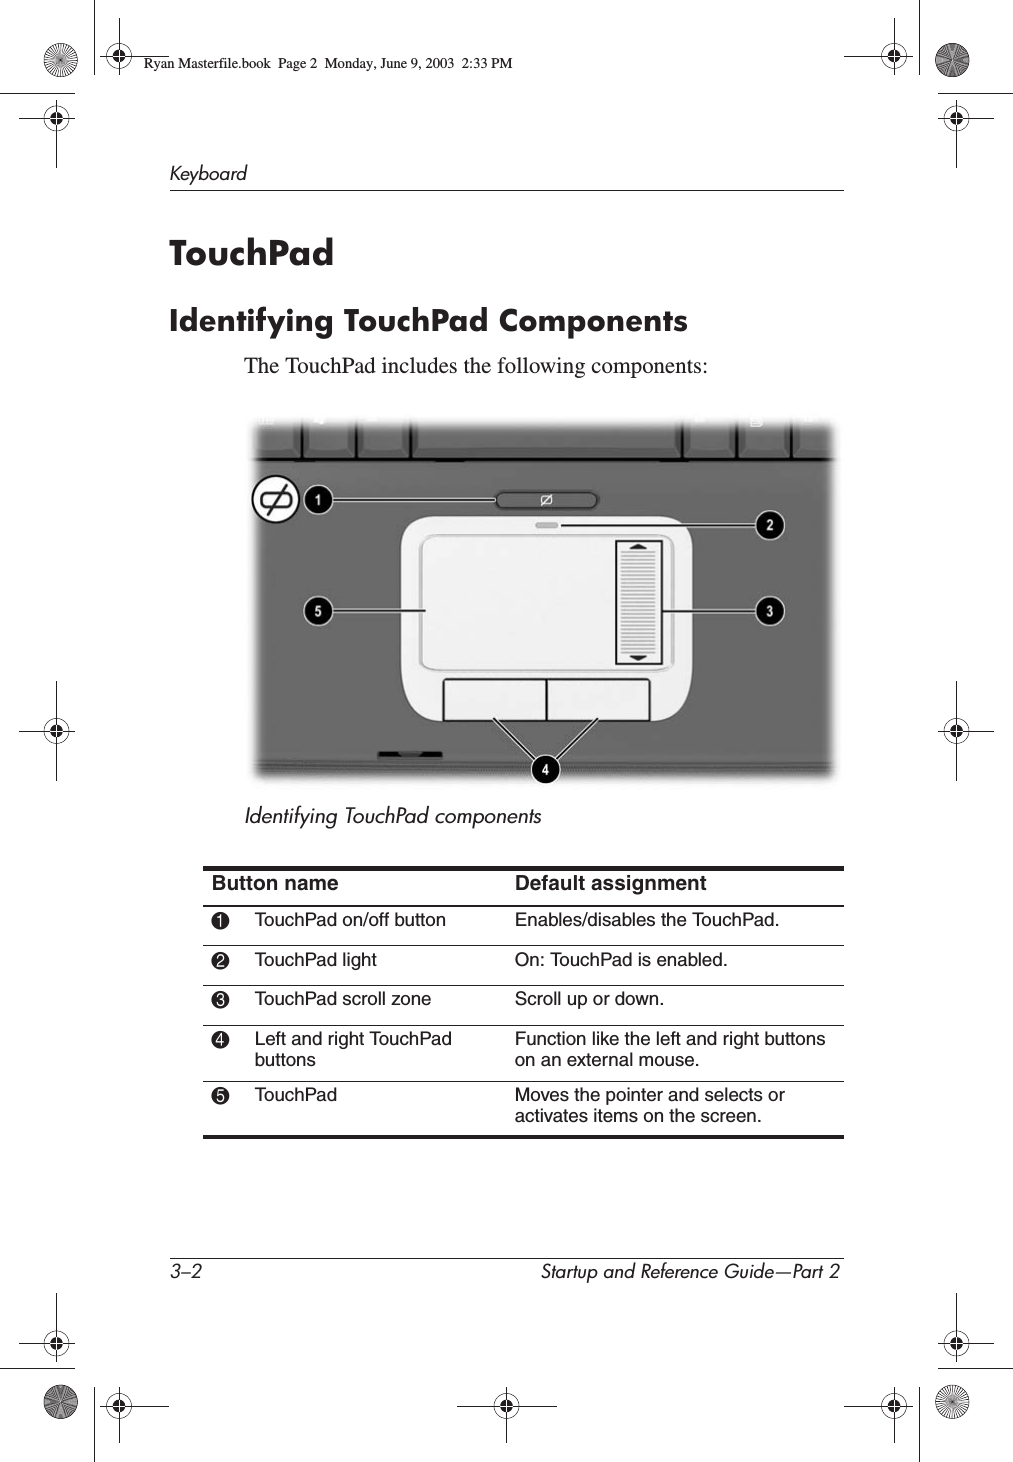 3–2 Startup and Reference Guide—Part 2KeyboardTouchPad Identifying TouchPad ComponentsThe TouchPad includes the following components:Identifying TouchPad componentsButton name Default assignment1TouchPad on/off button Enables/disables the TouchPad.2TouchPad light On: TouchPad is enabled.3TouchPad scroll zone Scroll up or down.4Left and right TouchPad buttonsFunction like the left and right buttons on an external mouse.5TouchPad Moves the pointer and selects or activates items on the screen.Ryan Masterfile.book  Page 2  Monday, June 9, 2003  2:33 PM